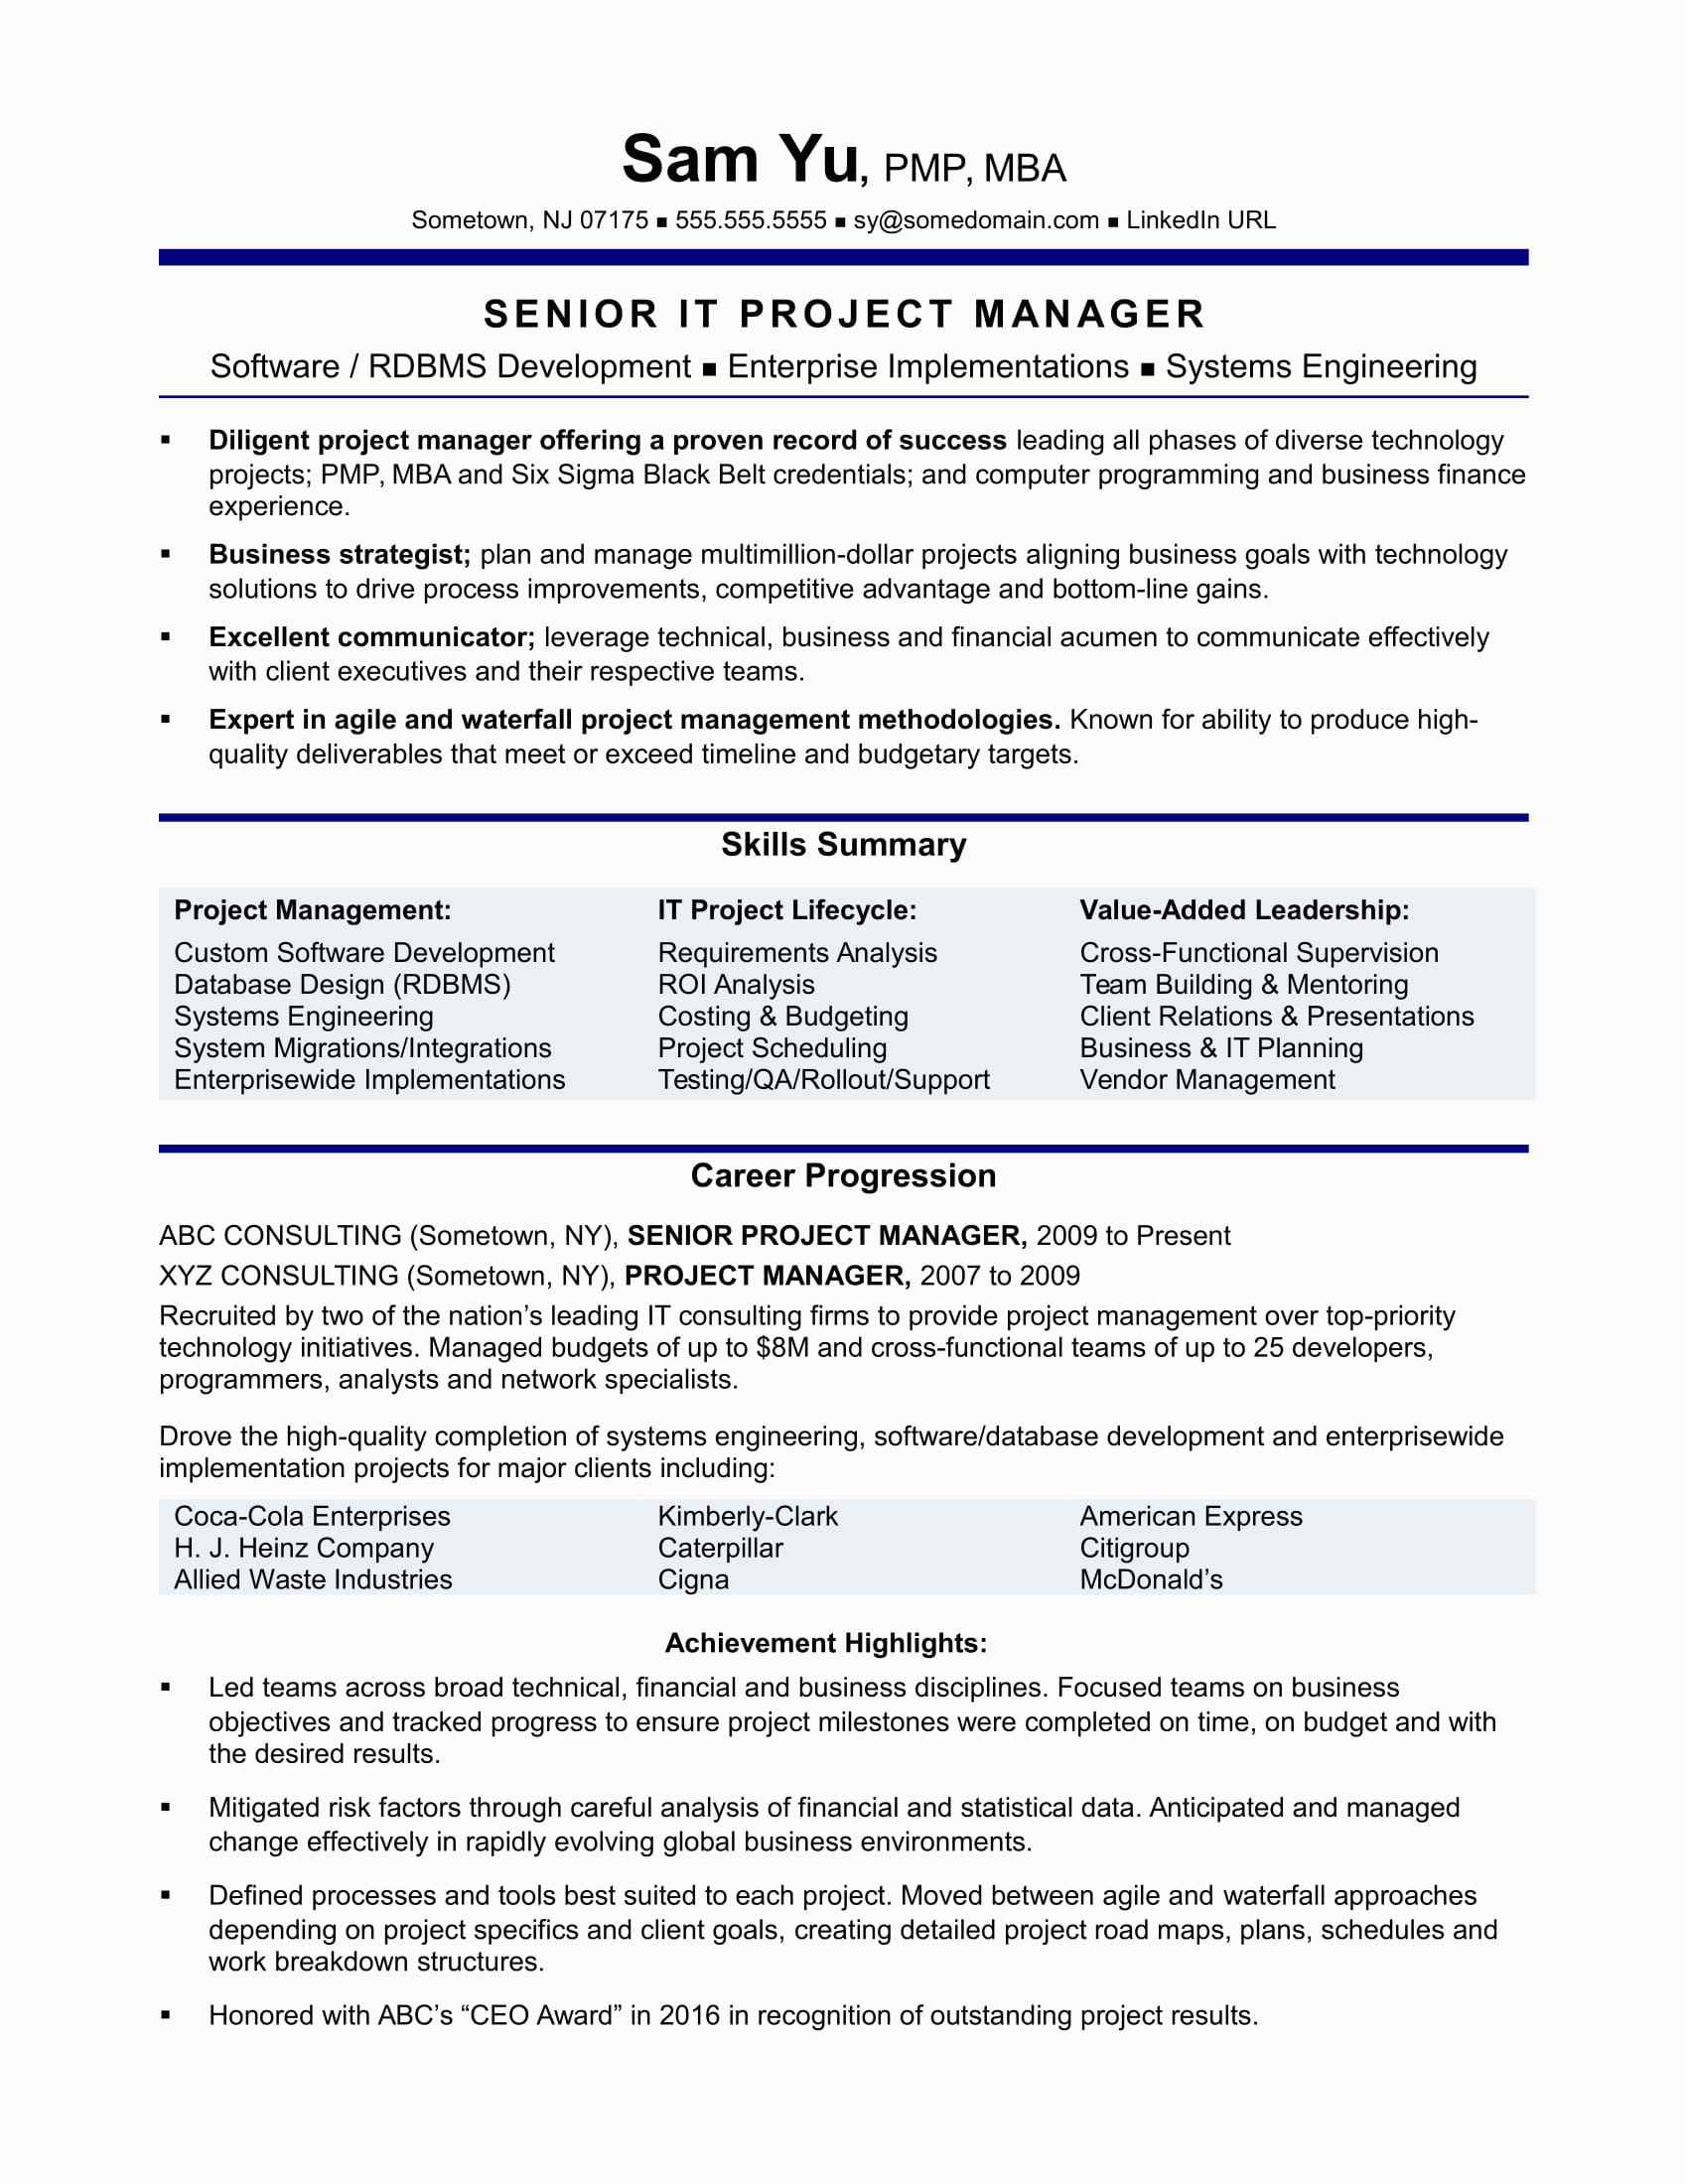 Sample Senior It Project Manager Resume Experienced It Project Manager Resume